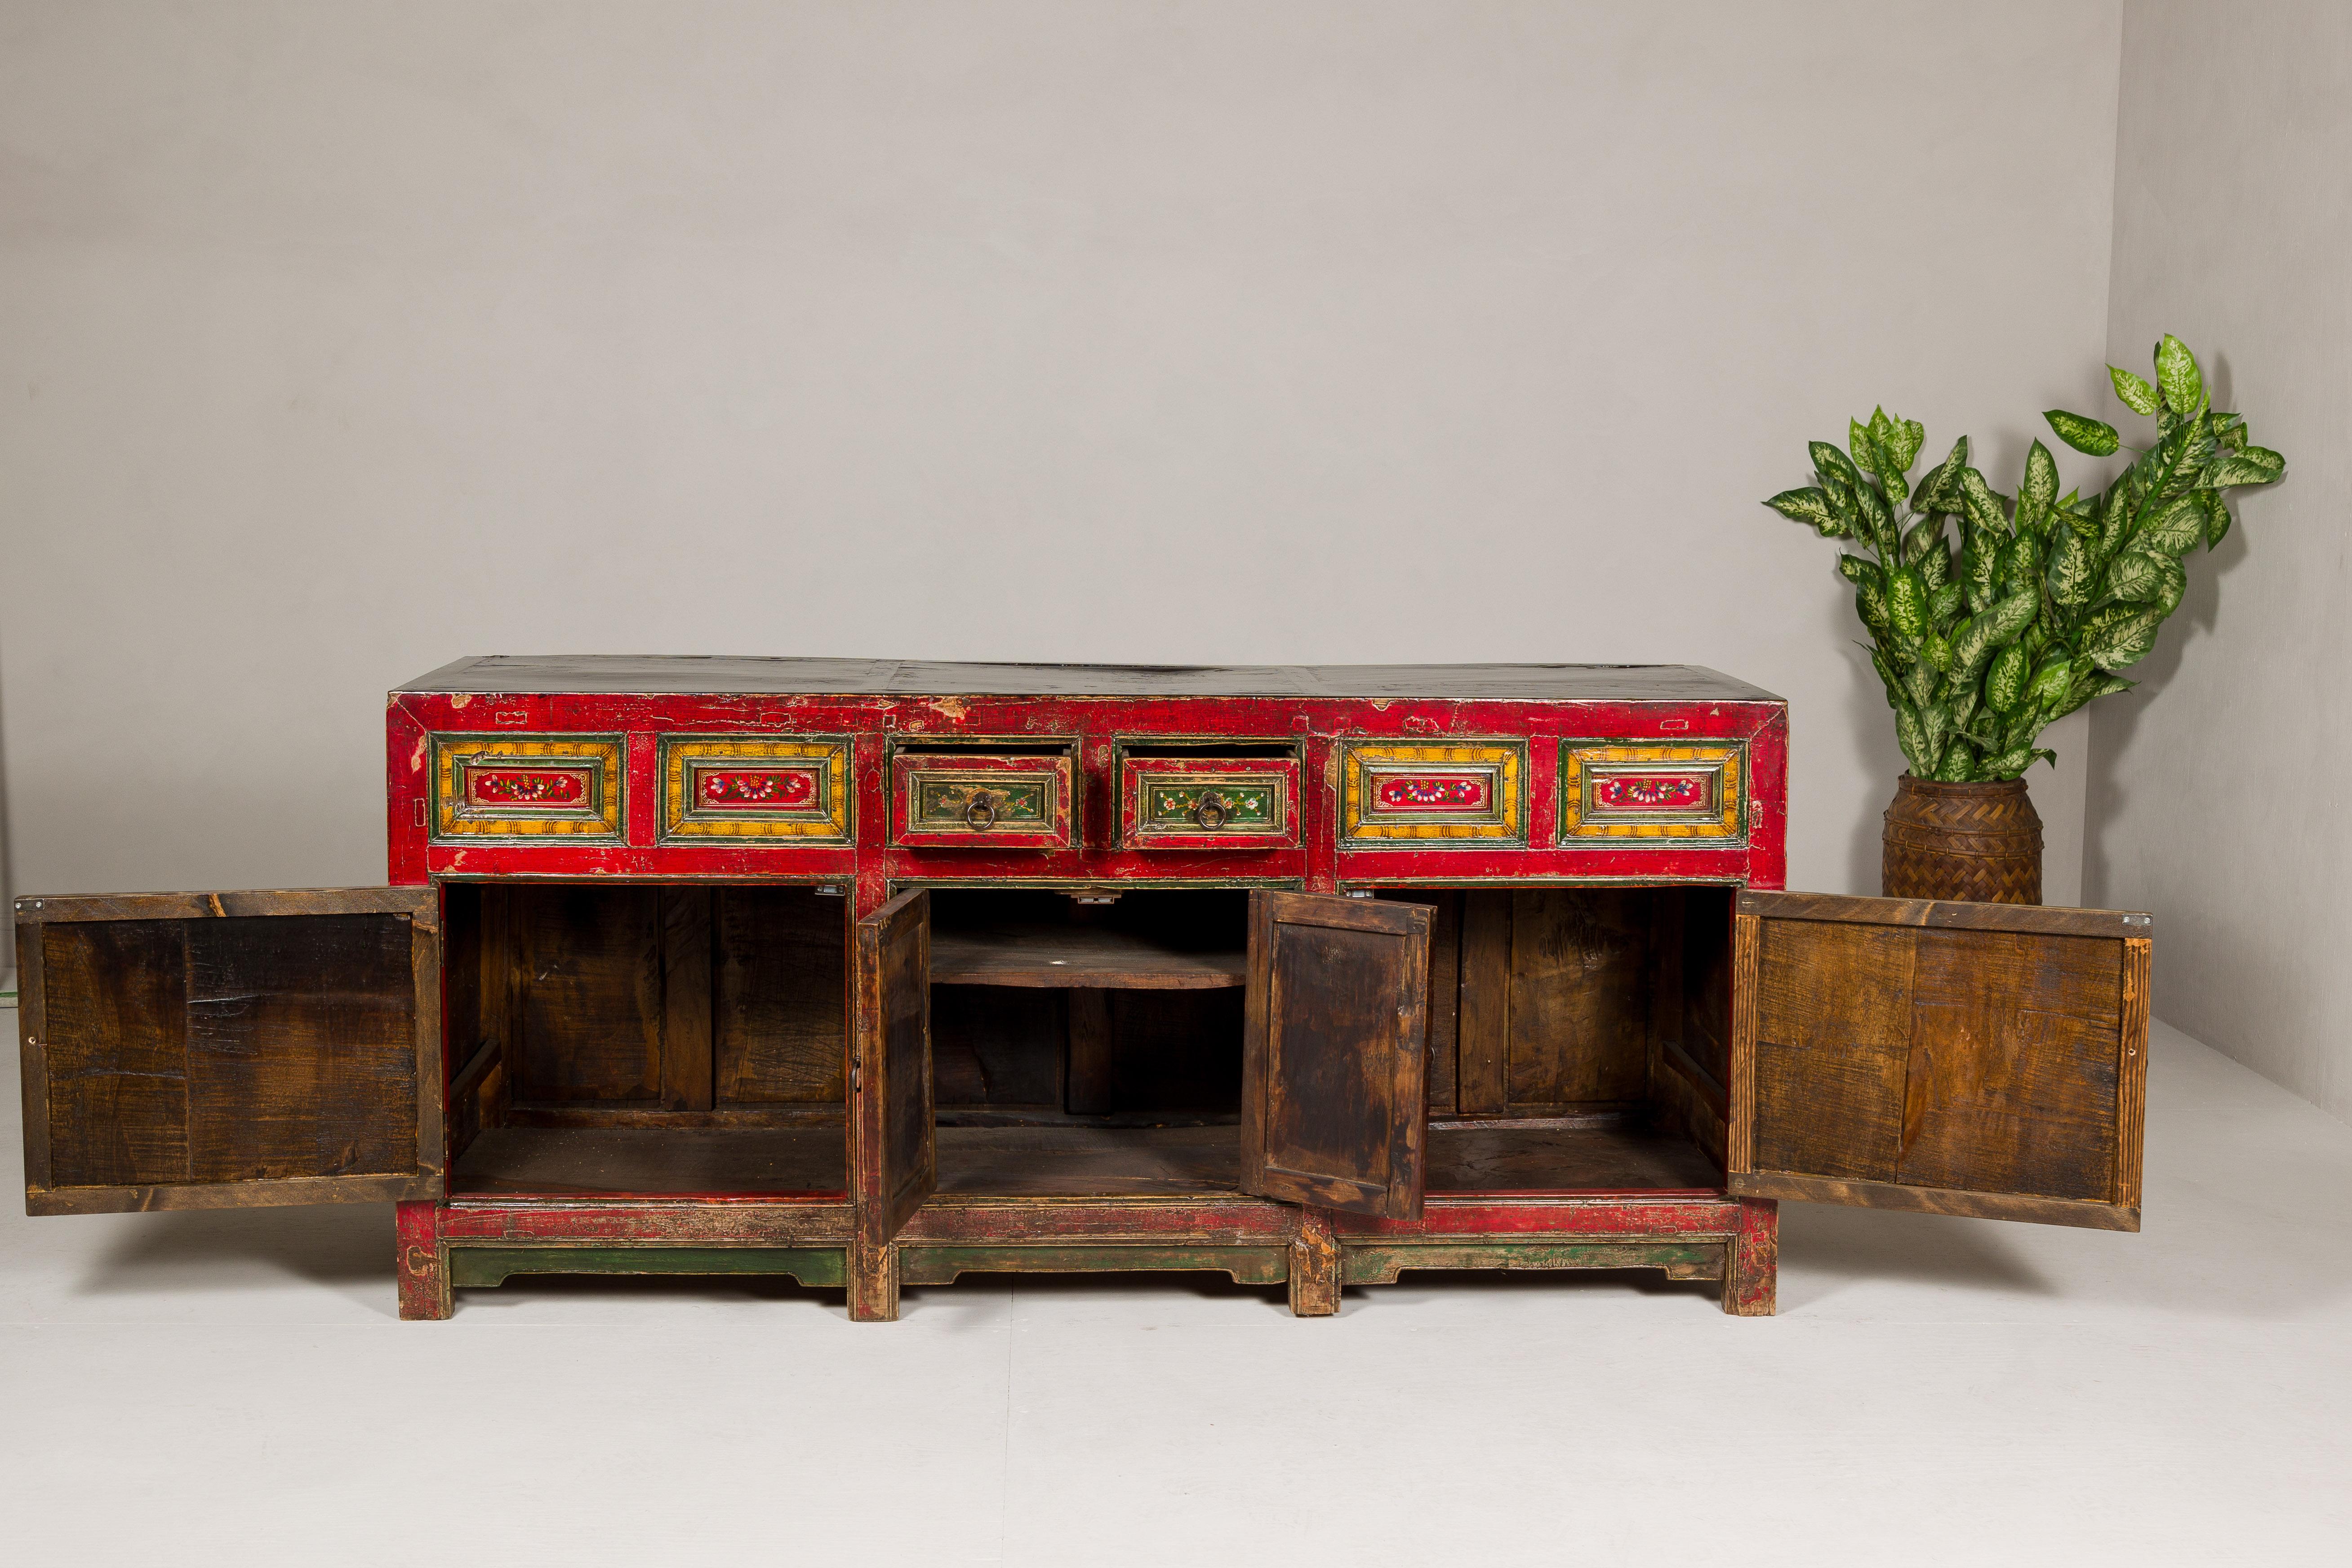 19th Century Mongolian Polychrome Sideboard with Doors, Drawers and Floral Décor 6